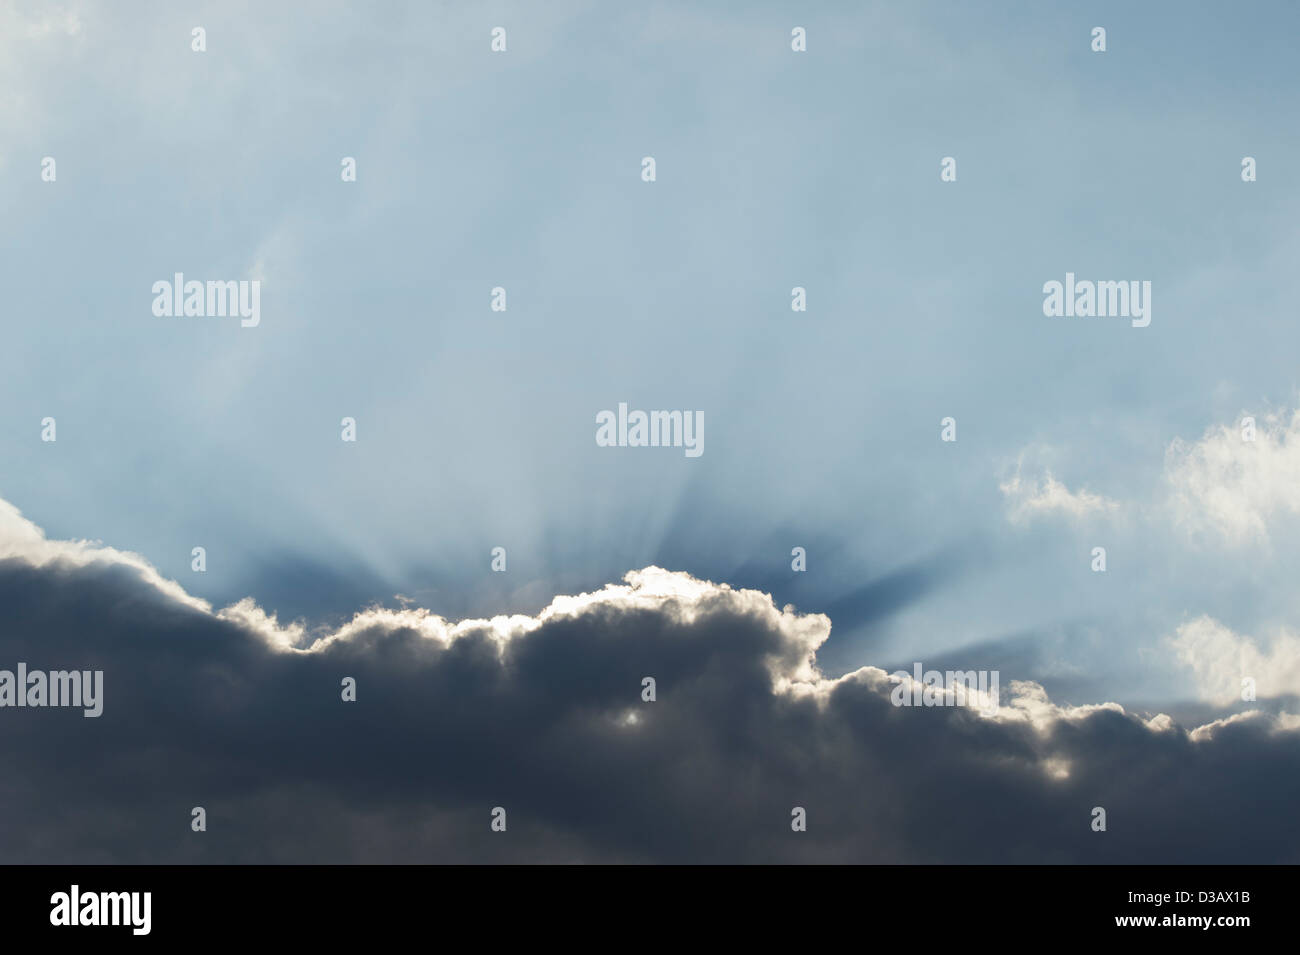 Storm cloud with a silver lining. India Stock Photo